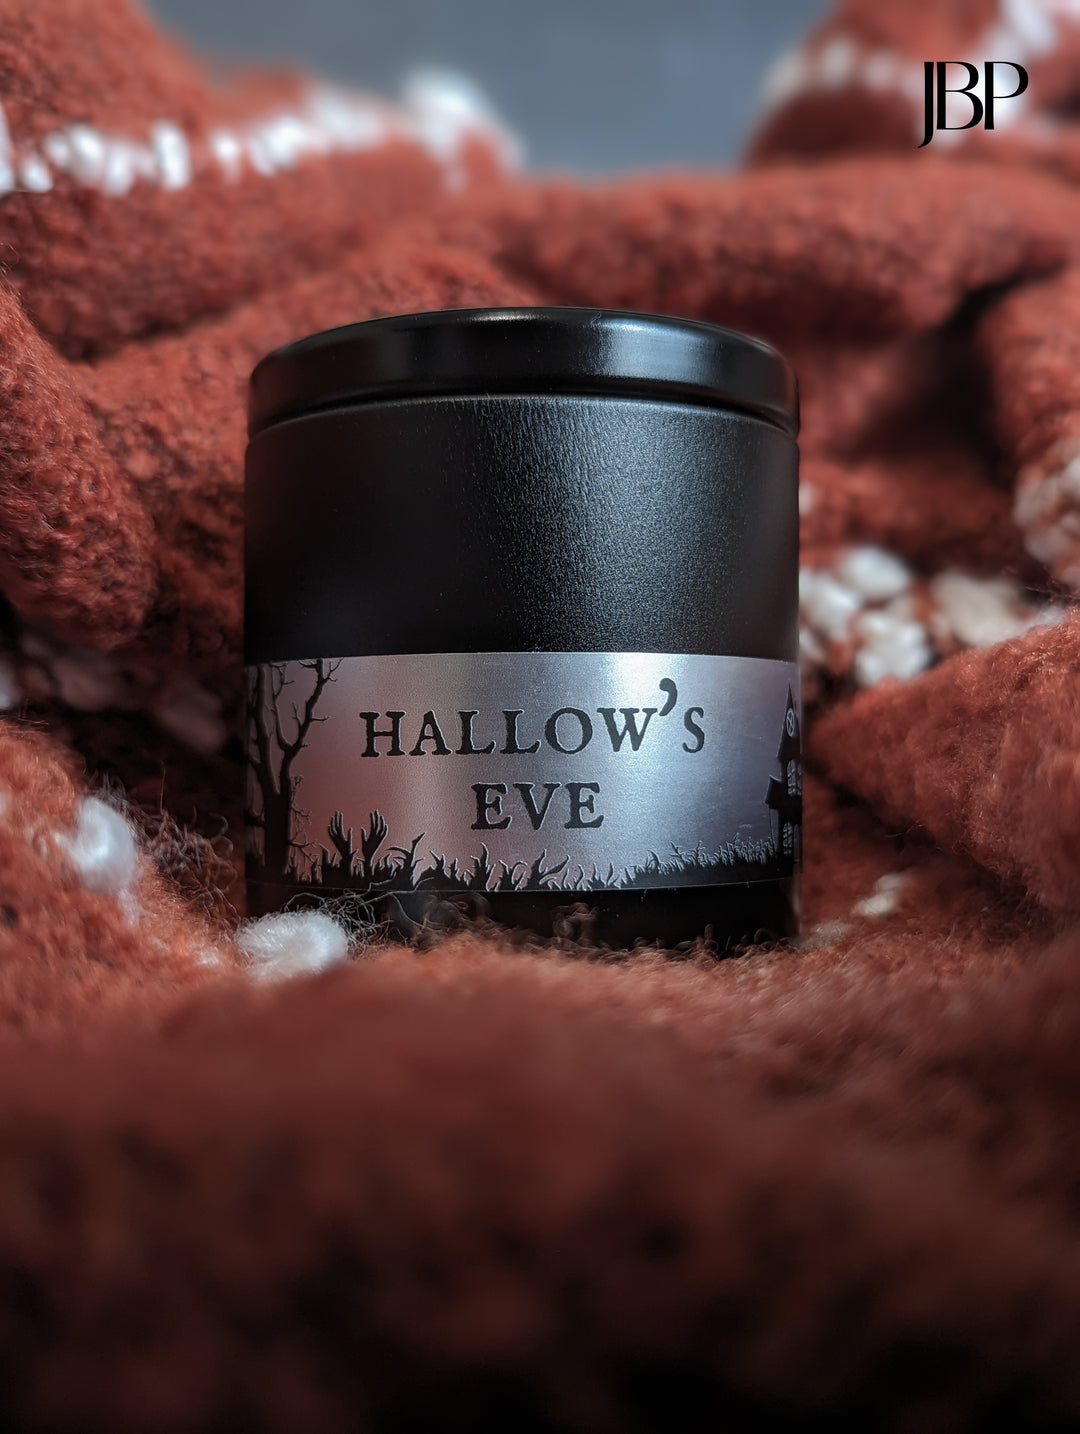 Hallow's Eve Wood Wick Soy Candle in matte black vessel by juneberryplace home fragrances